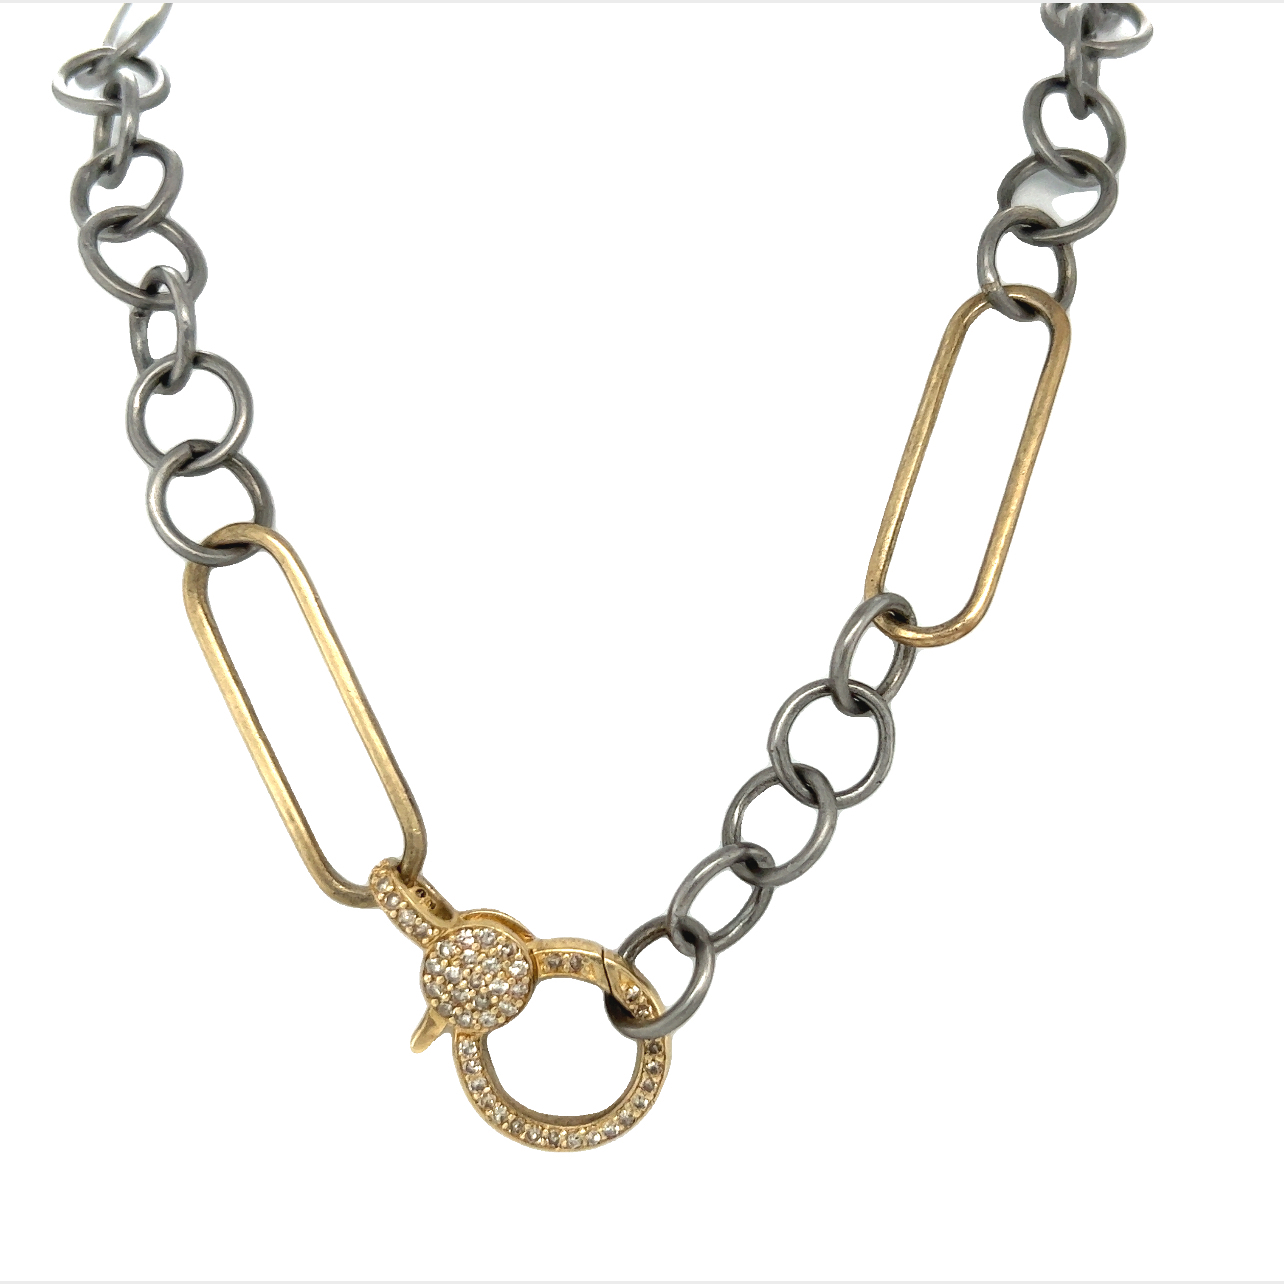 Featured image for “Chunky Two Tone Chain with Pavé Diamond Clasp”